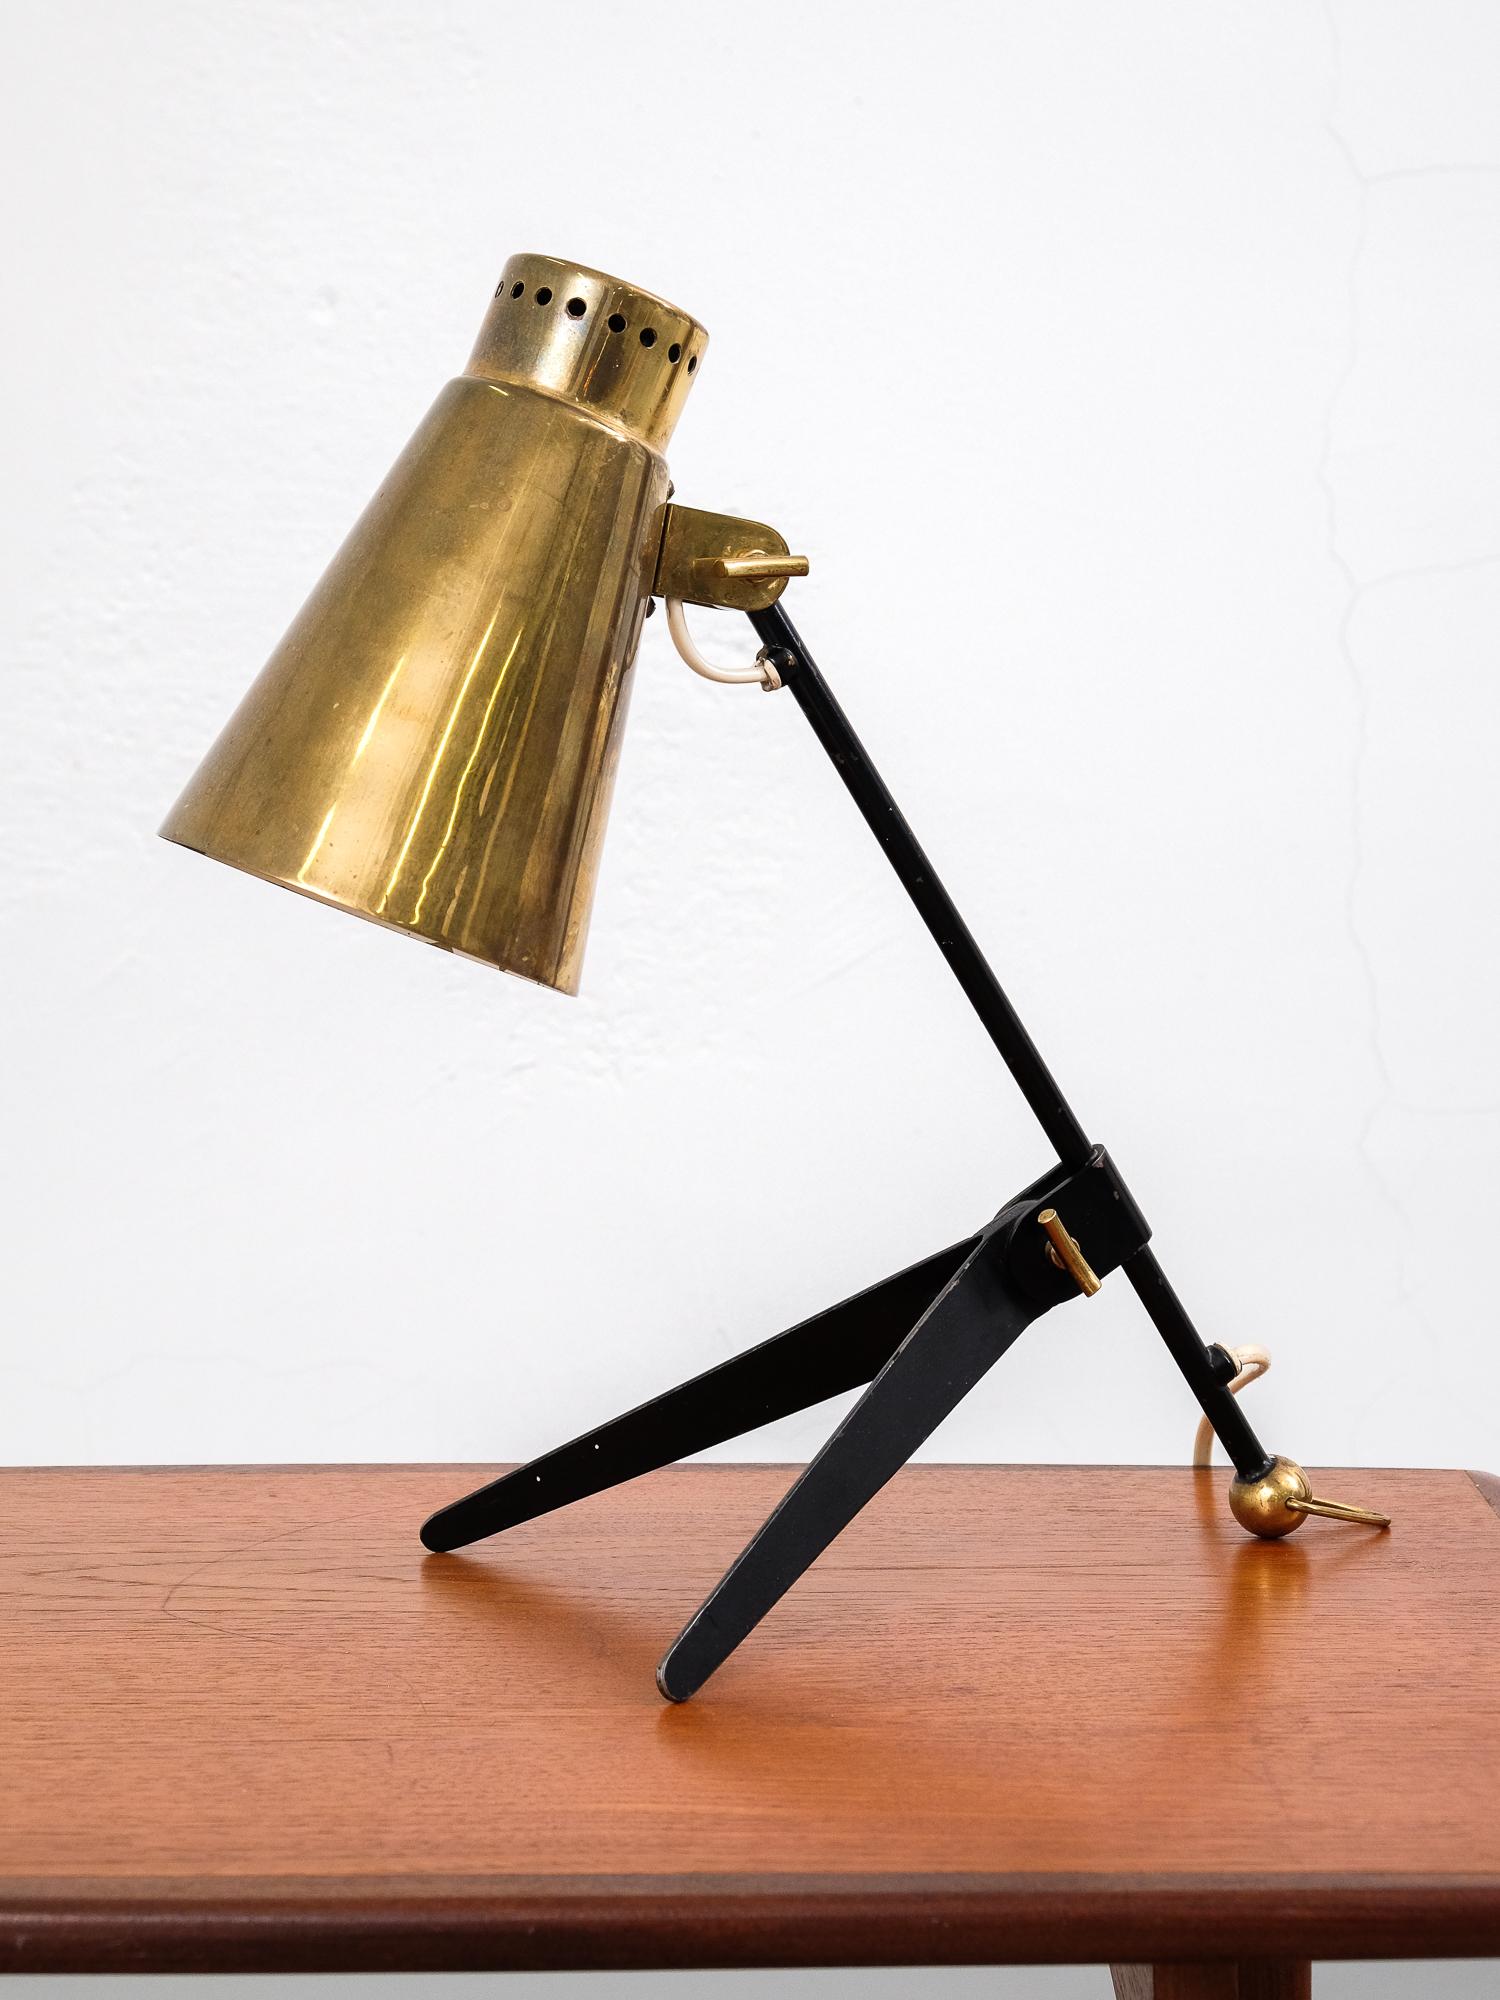 Painted Brass and Metal Table or Wall Lamp Model 'Ev70' by Itsu, Finland, 1950s